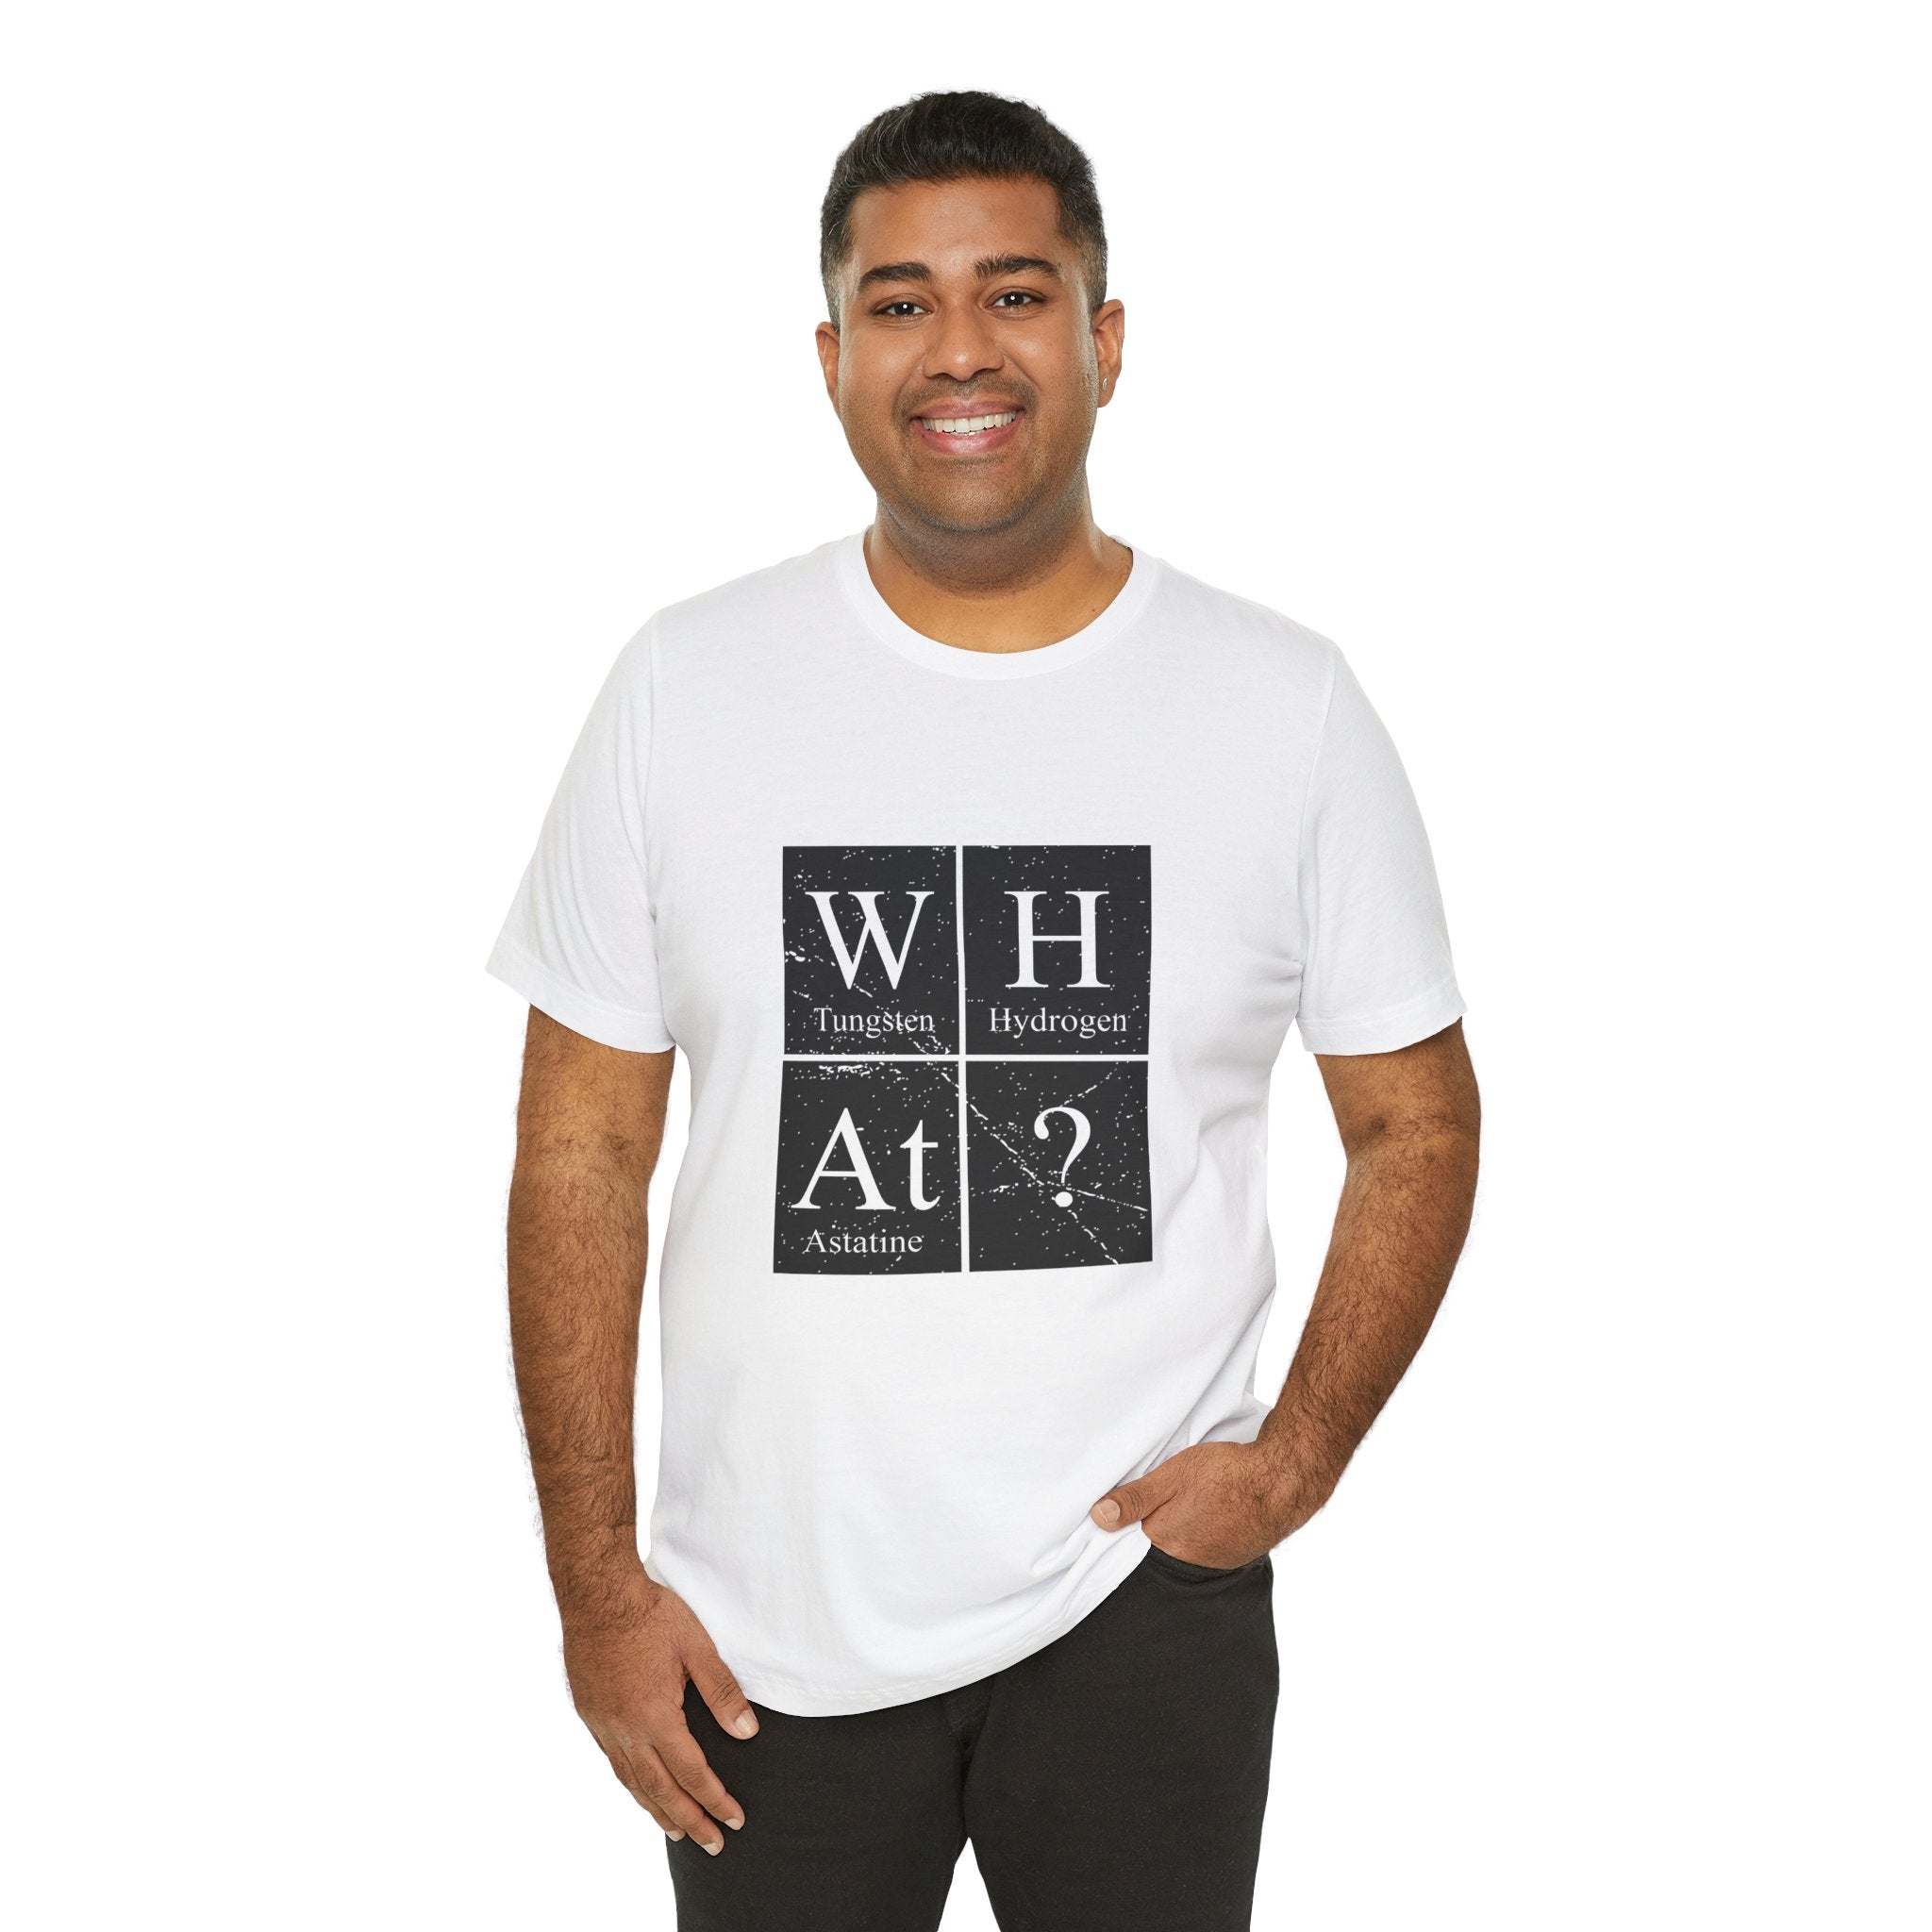 A man smiling at the camera, wearing a white unisex W-H-At-? tee with a periodic table design, stands against a white background.